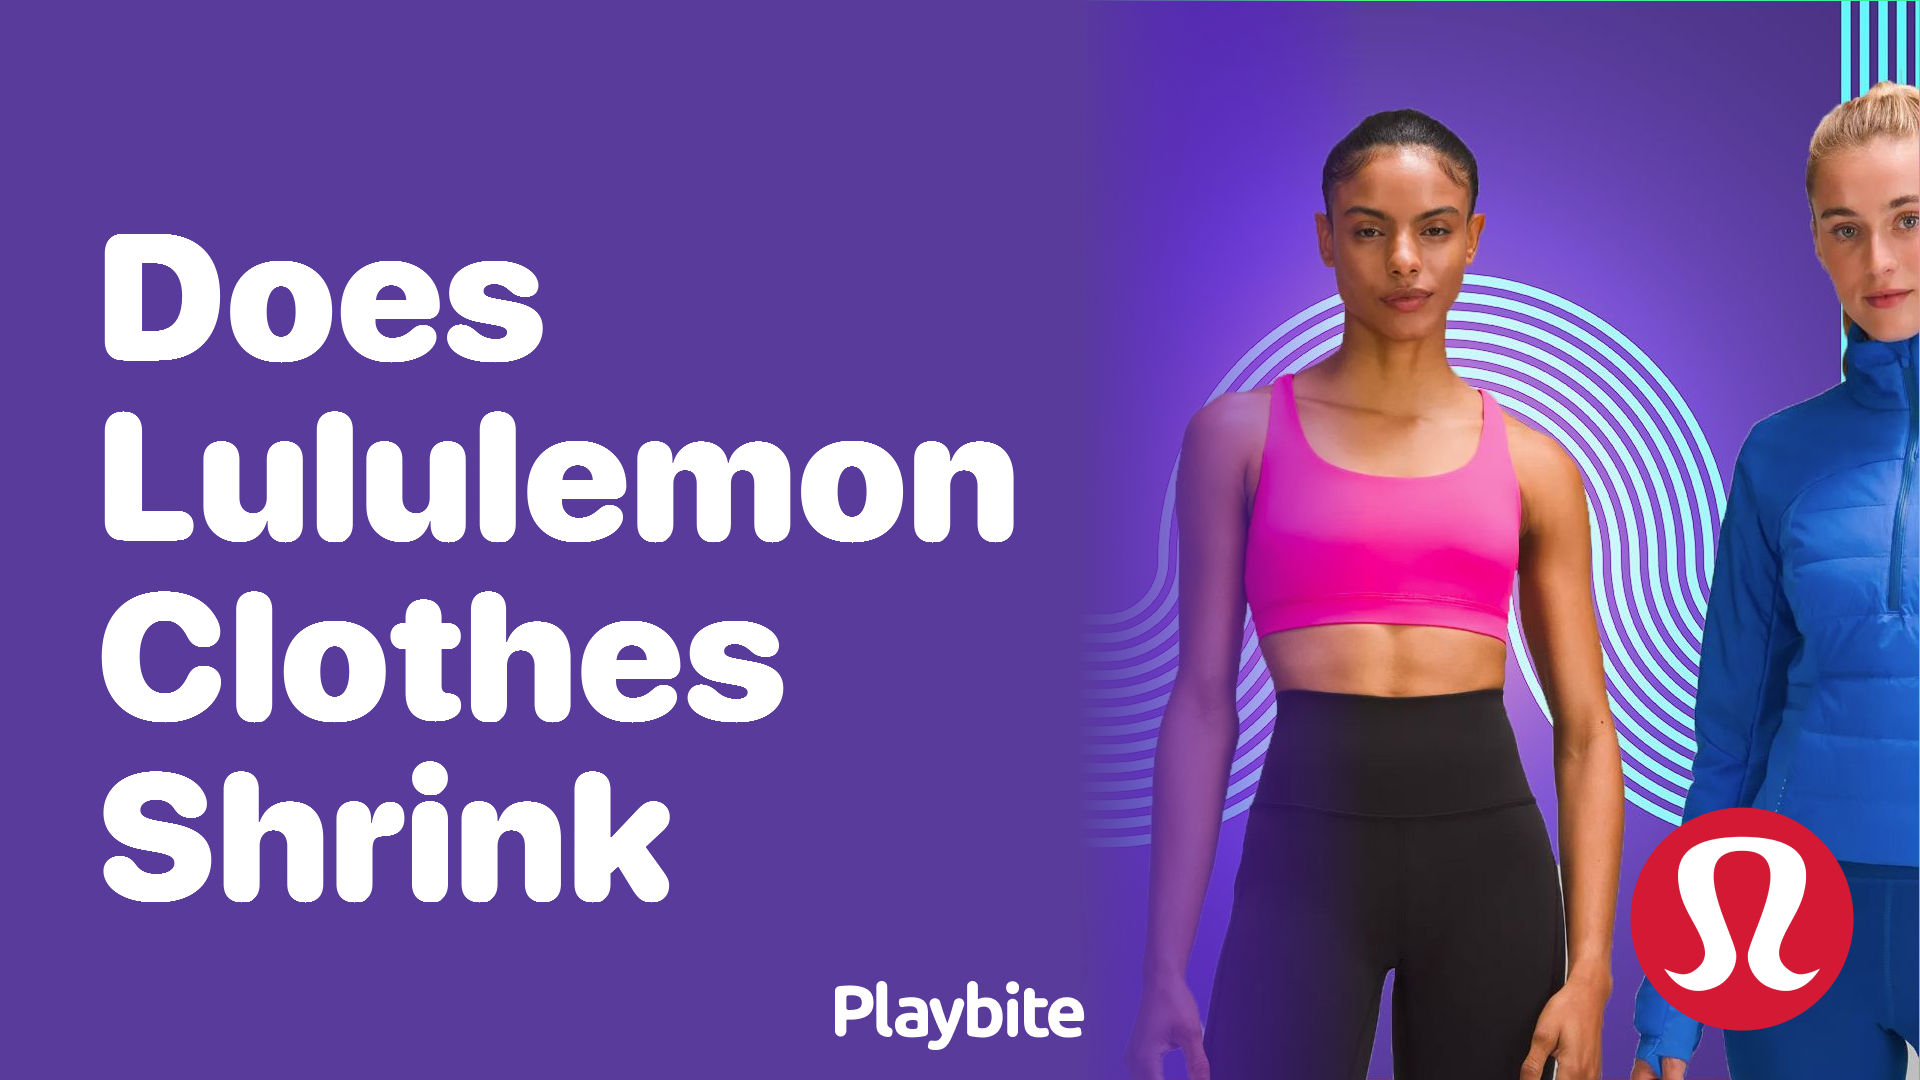 Does Lululemon Clothes Shrink? Find Out Here! - Playbite